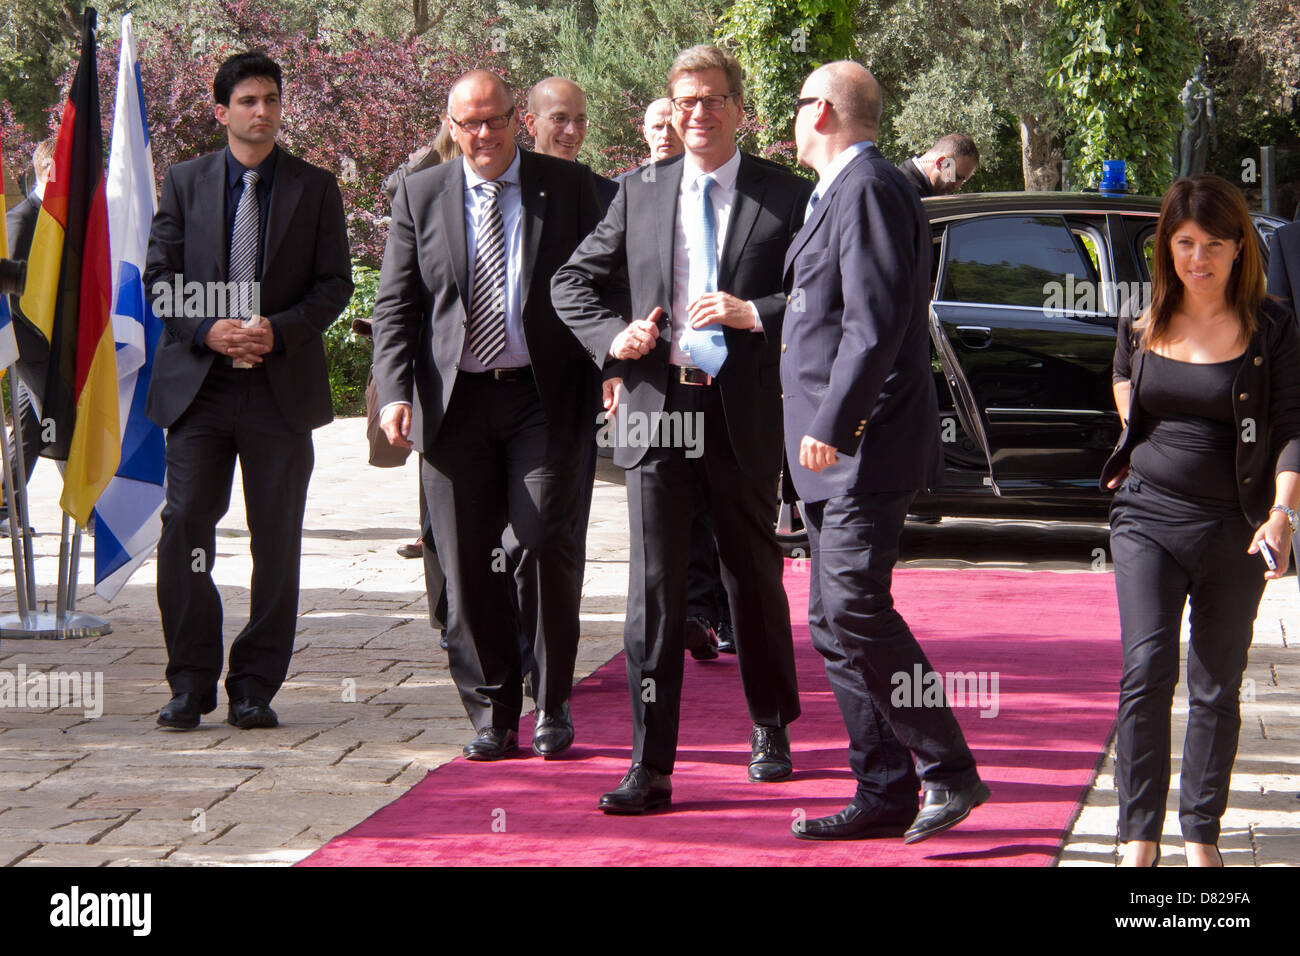 Jerusalem, Israel. 17th May 2013. German FM, Guido Westerwelle (forefront center), arrives on an official visit with Israeli President Peres at the Presidents' residence. Jerusalem, Israel. 17-May-2013.  Israeli President Shimon Peres hosts Minister of Foreign Affairs of the Federal Republic of Germany, Guido Westerwelle, for a diplomatic work meeting at the Presidents' Residence. Credit:  Nir Alon / Alamy Live News Stock Photo